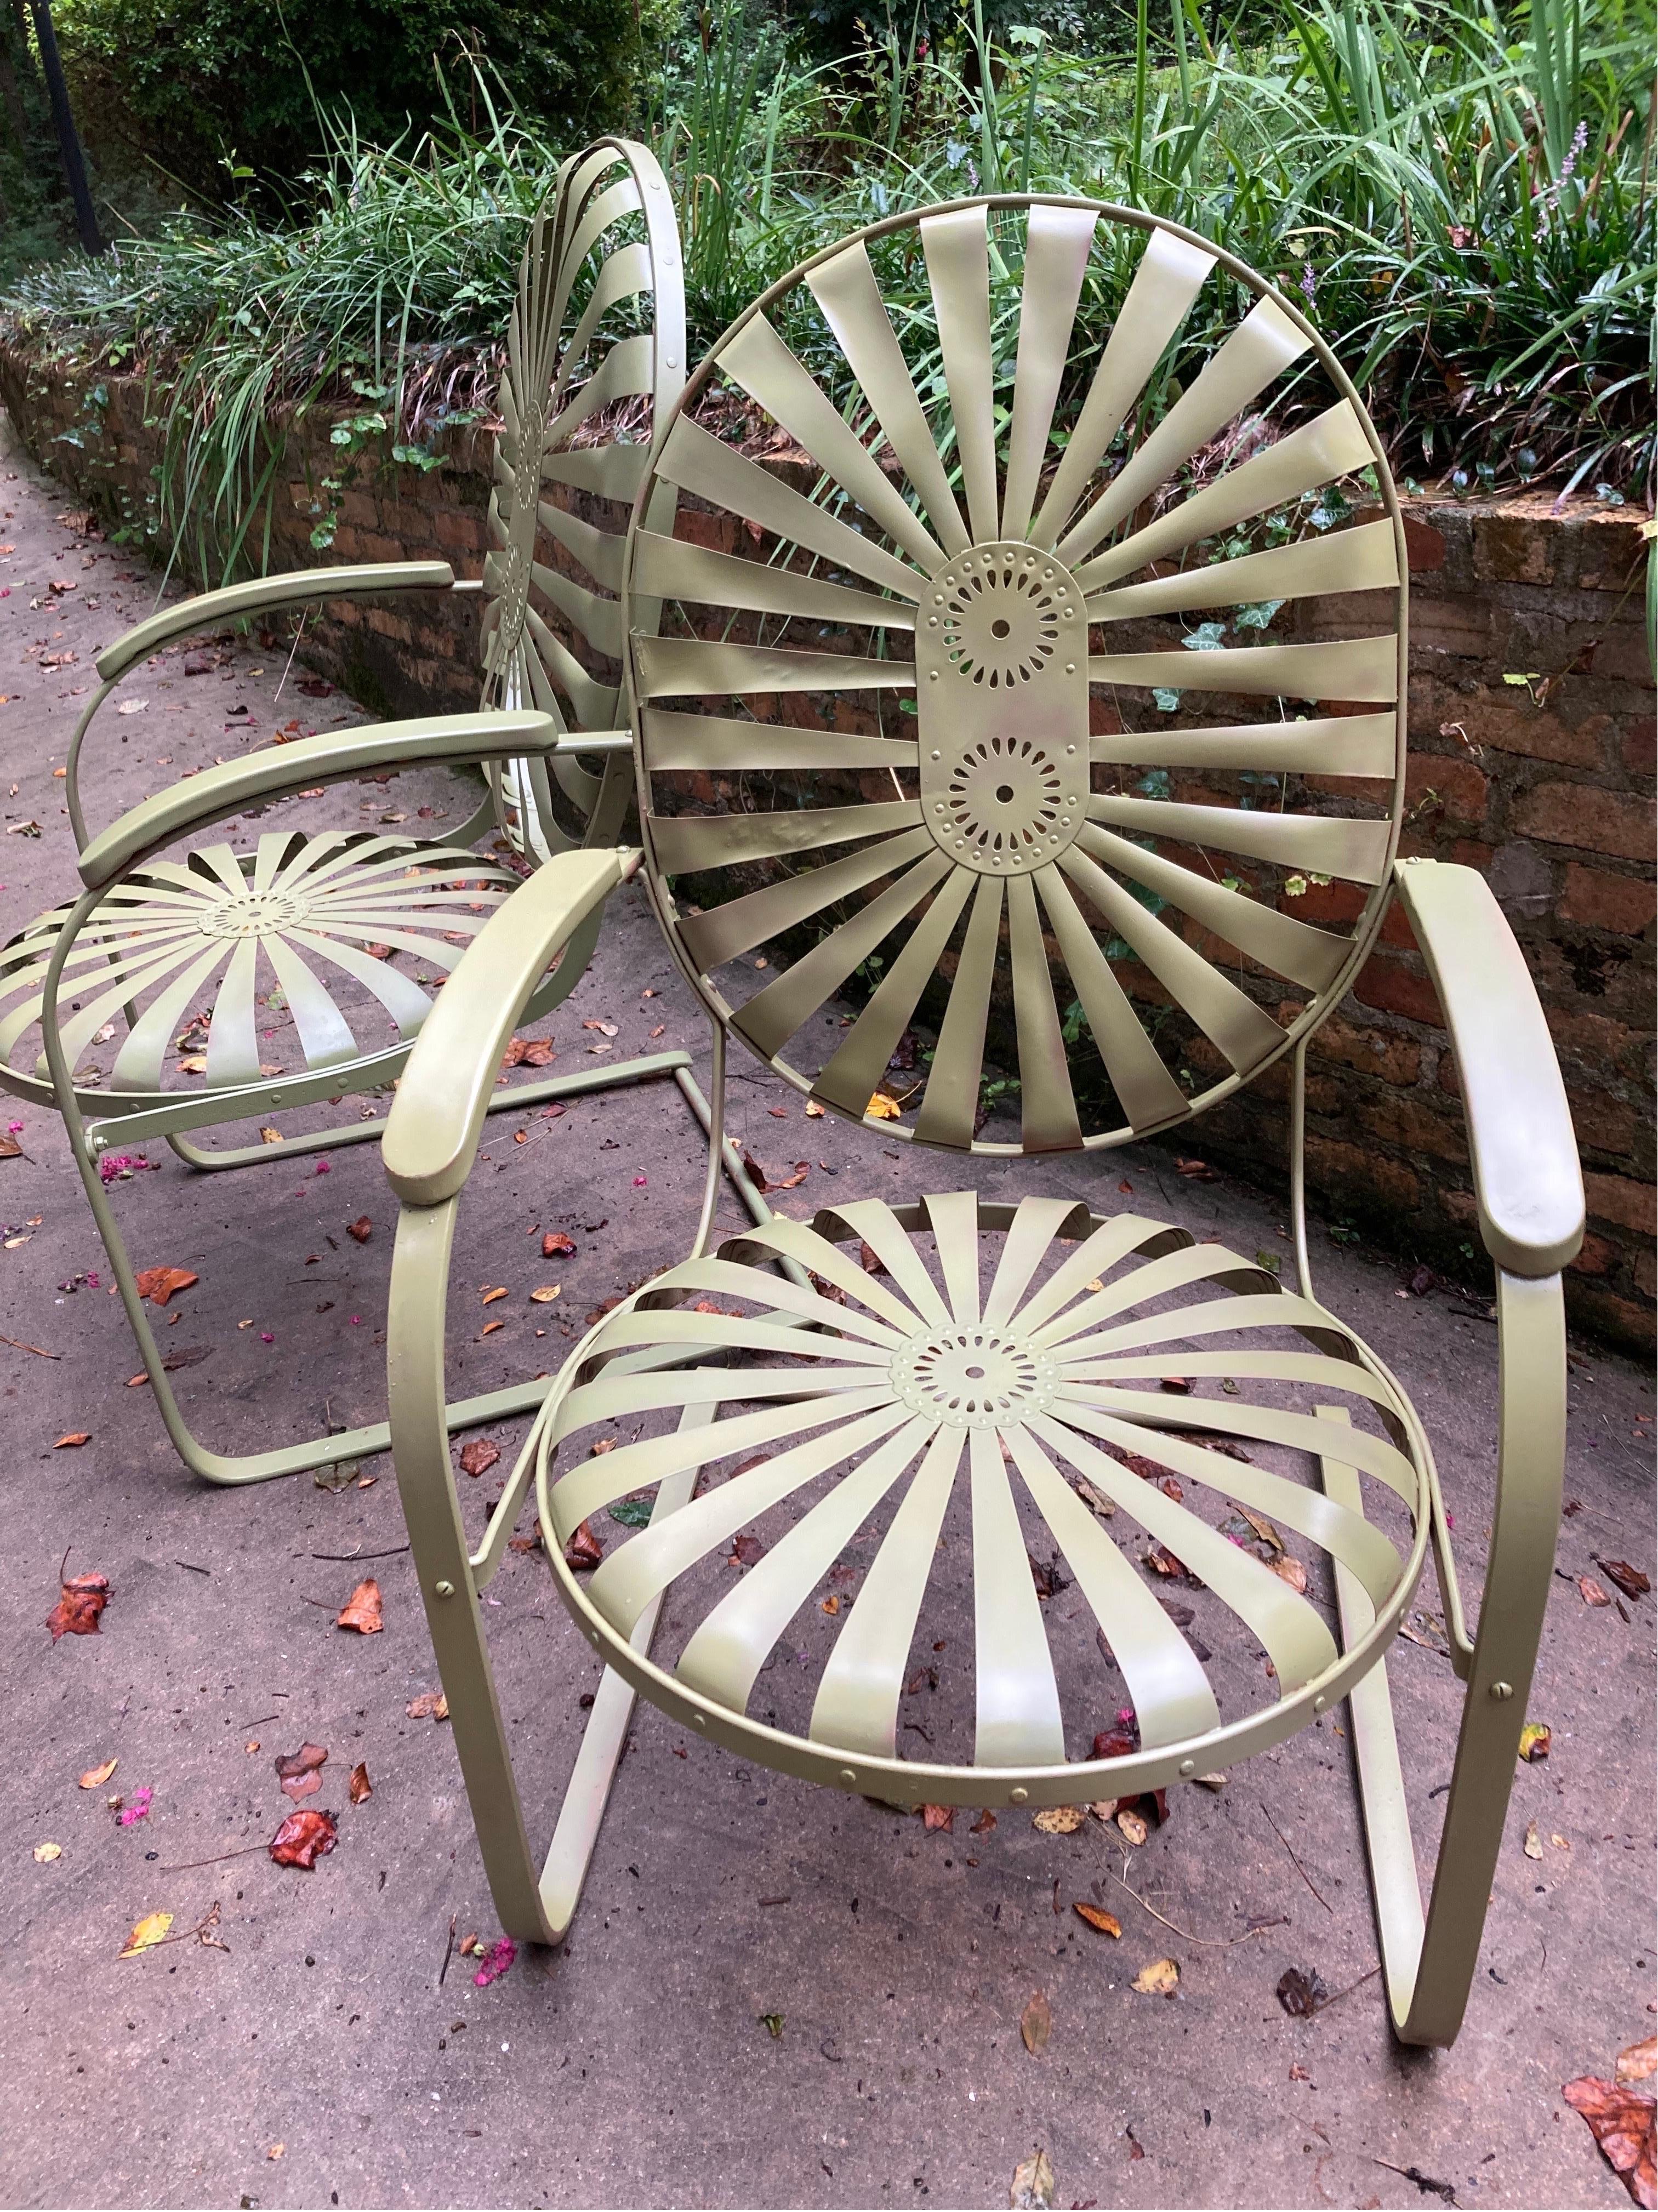 francois carre cantilever garden chair.

c.1930’s French art deco wrought iron & spring steel chairs by Francois Carre.

measure 25” wide, 41” tall, with a 18” seat height of and a depth of 26”.


****garden chair with rocking cantilevered bases and